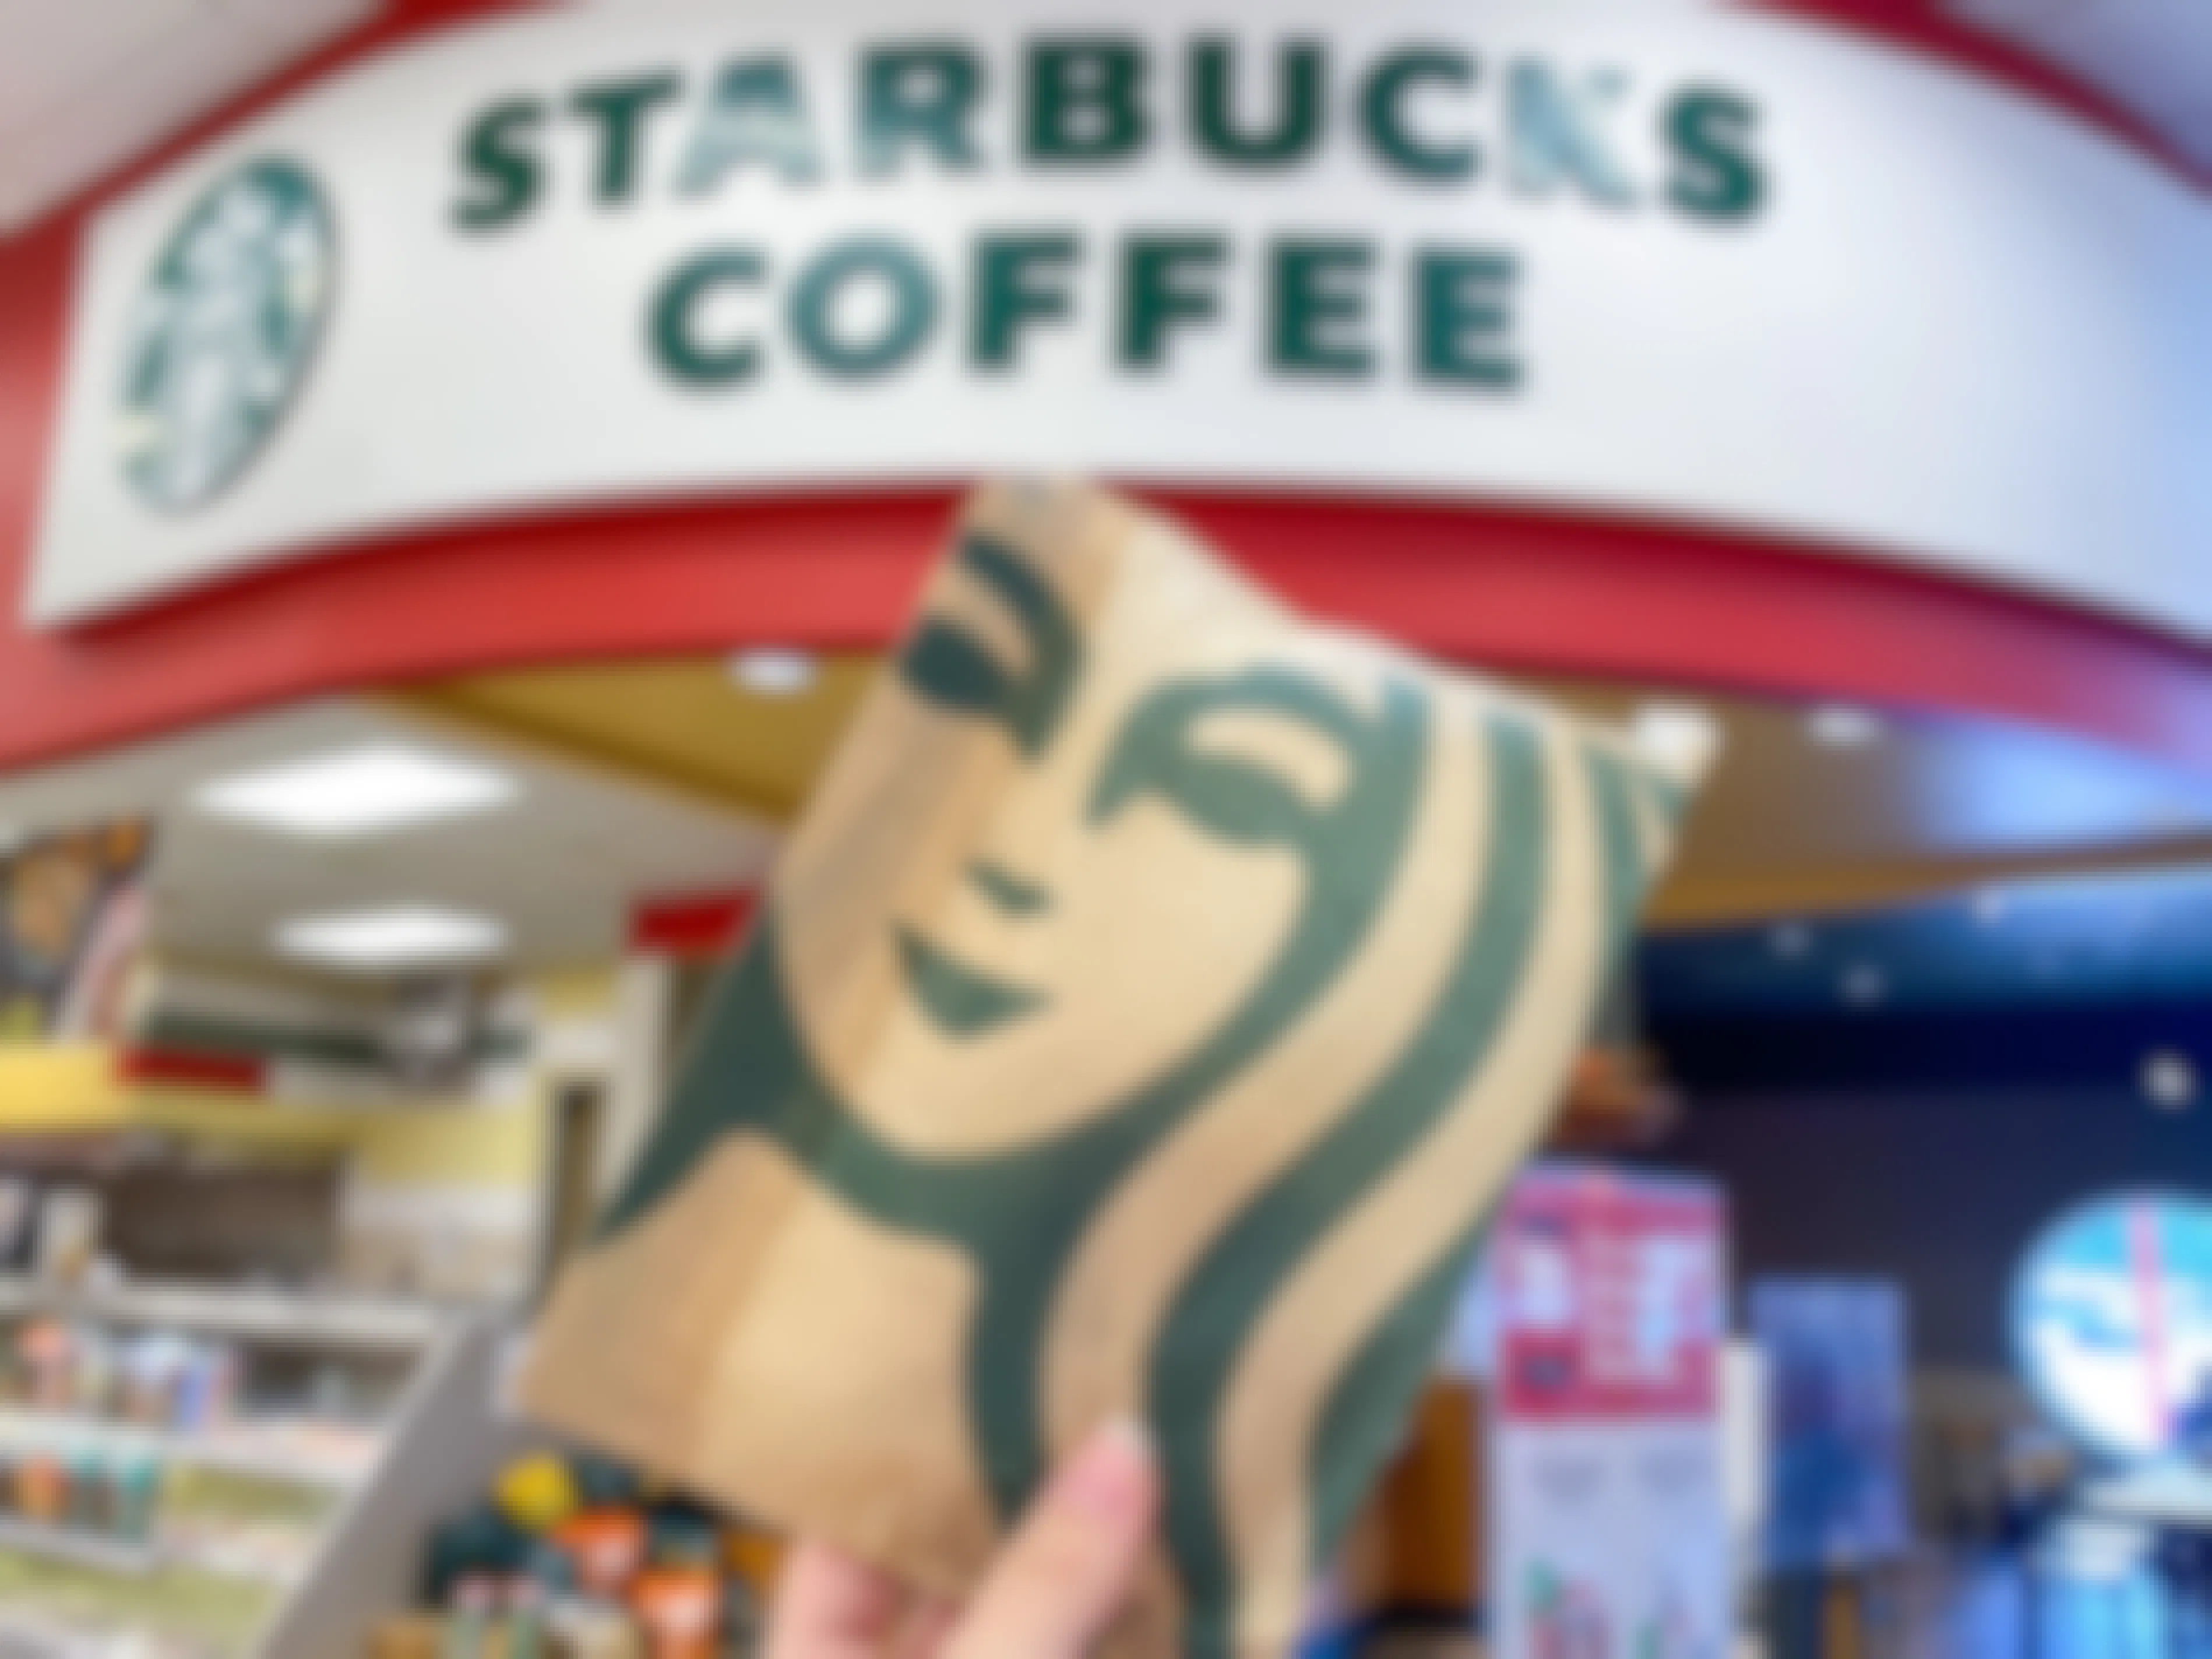 A person's hand holding up a Starbucks bag in front of the Starbucks Coffee sign inside Target.